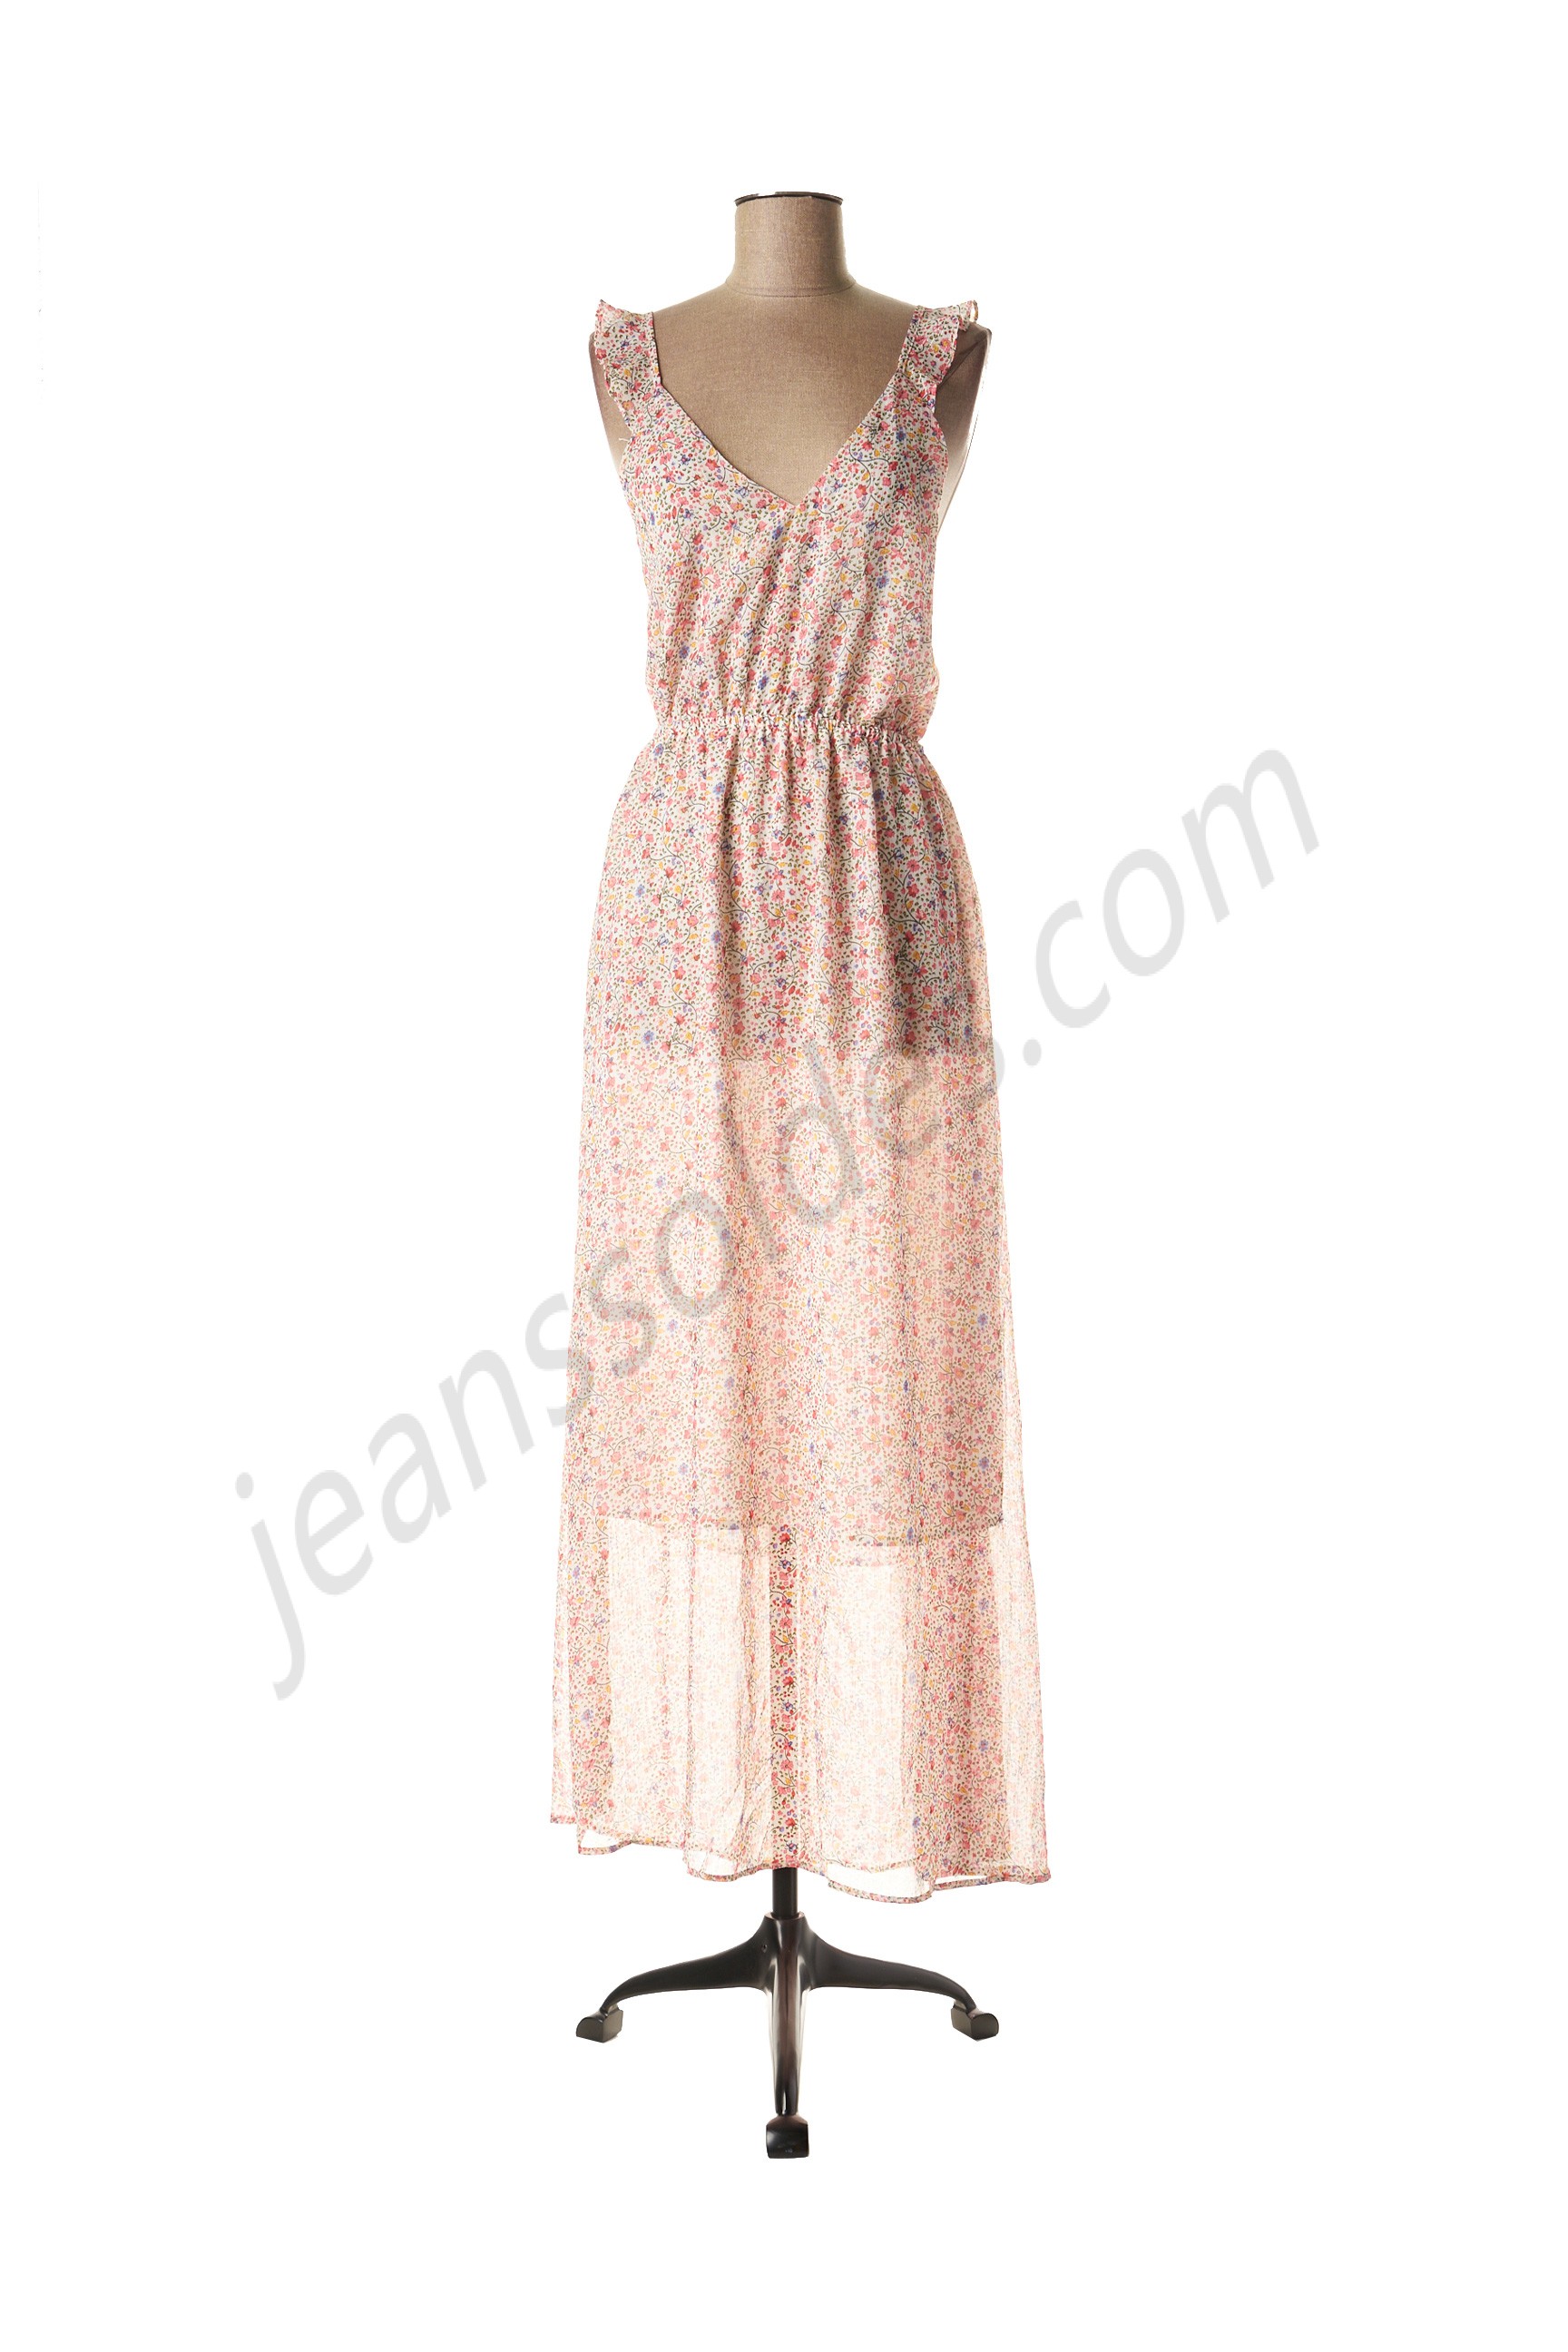 peace and love-Robe longue déstockage - peace and love-Robe longue déstockage